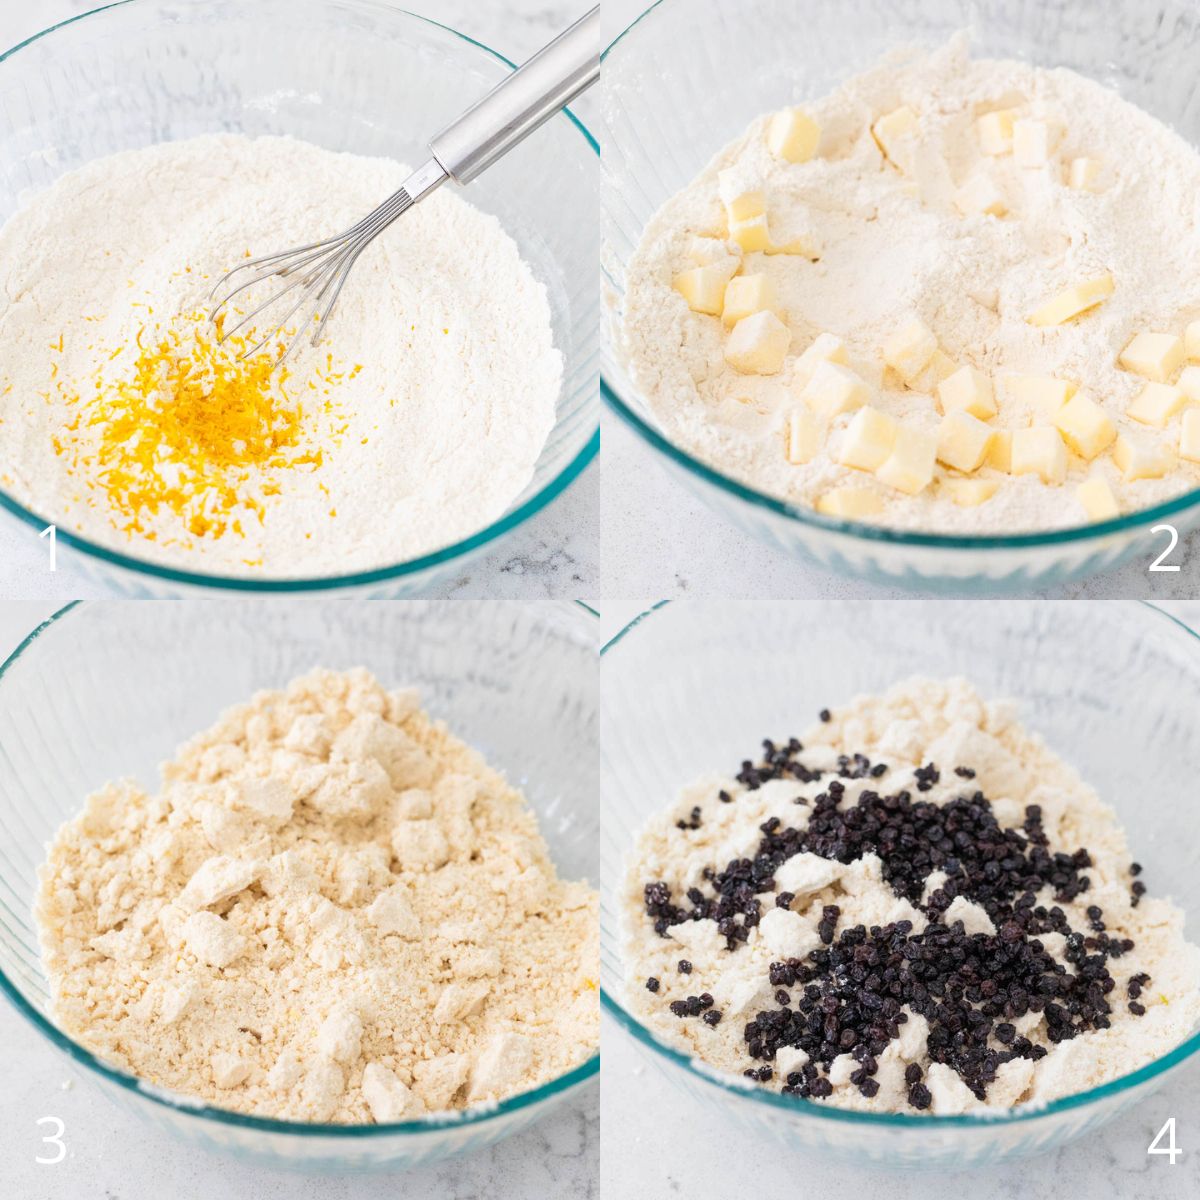 The step by step photos show how to mix the dry ingredients and work in the butter.